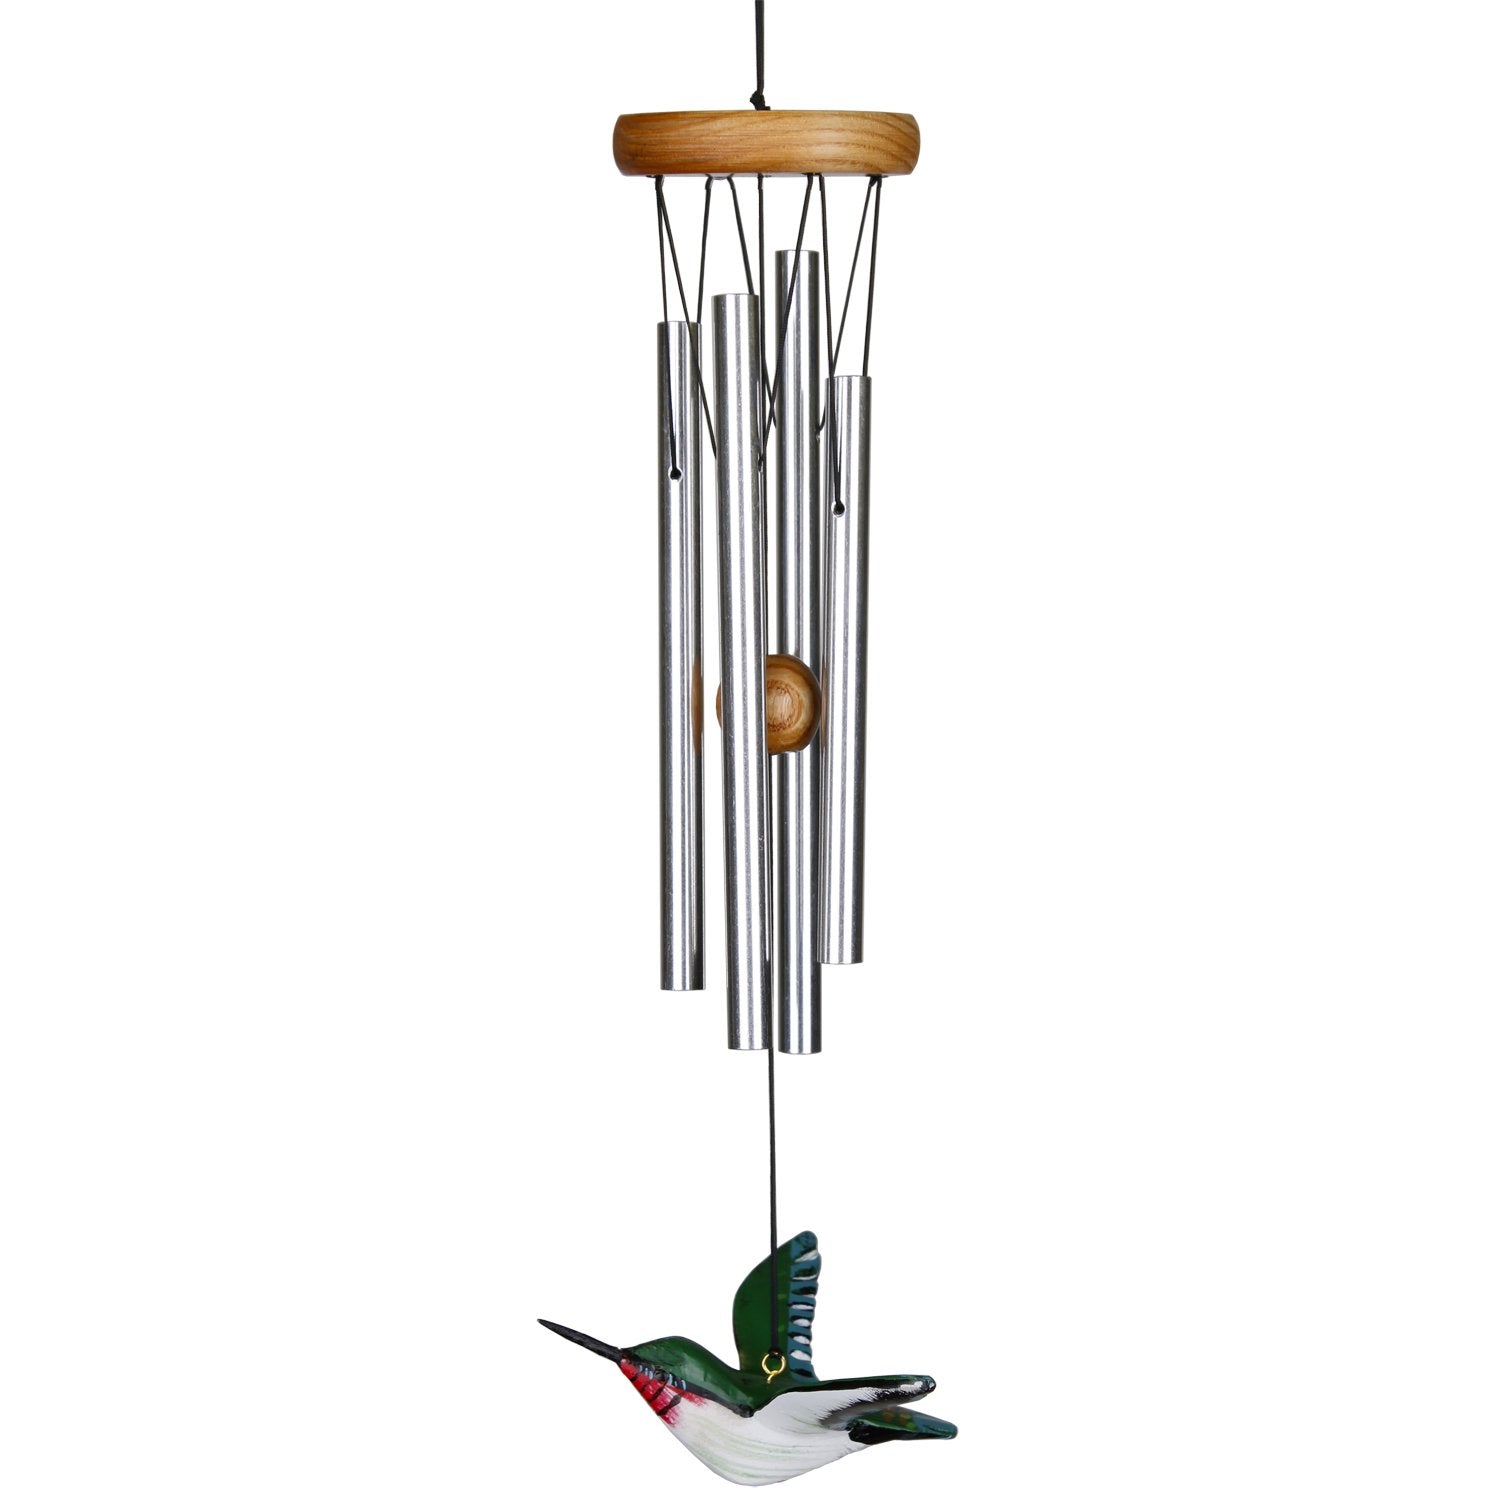 Hummer Chime alternate product image